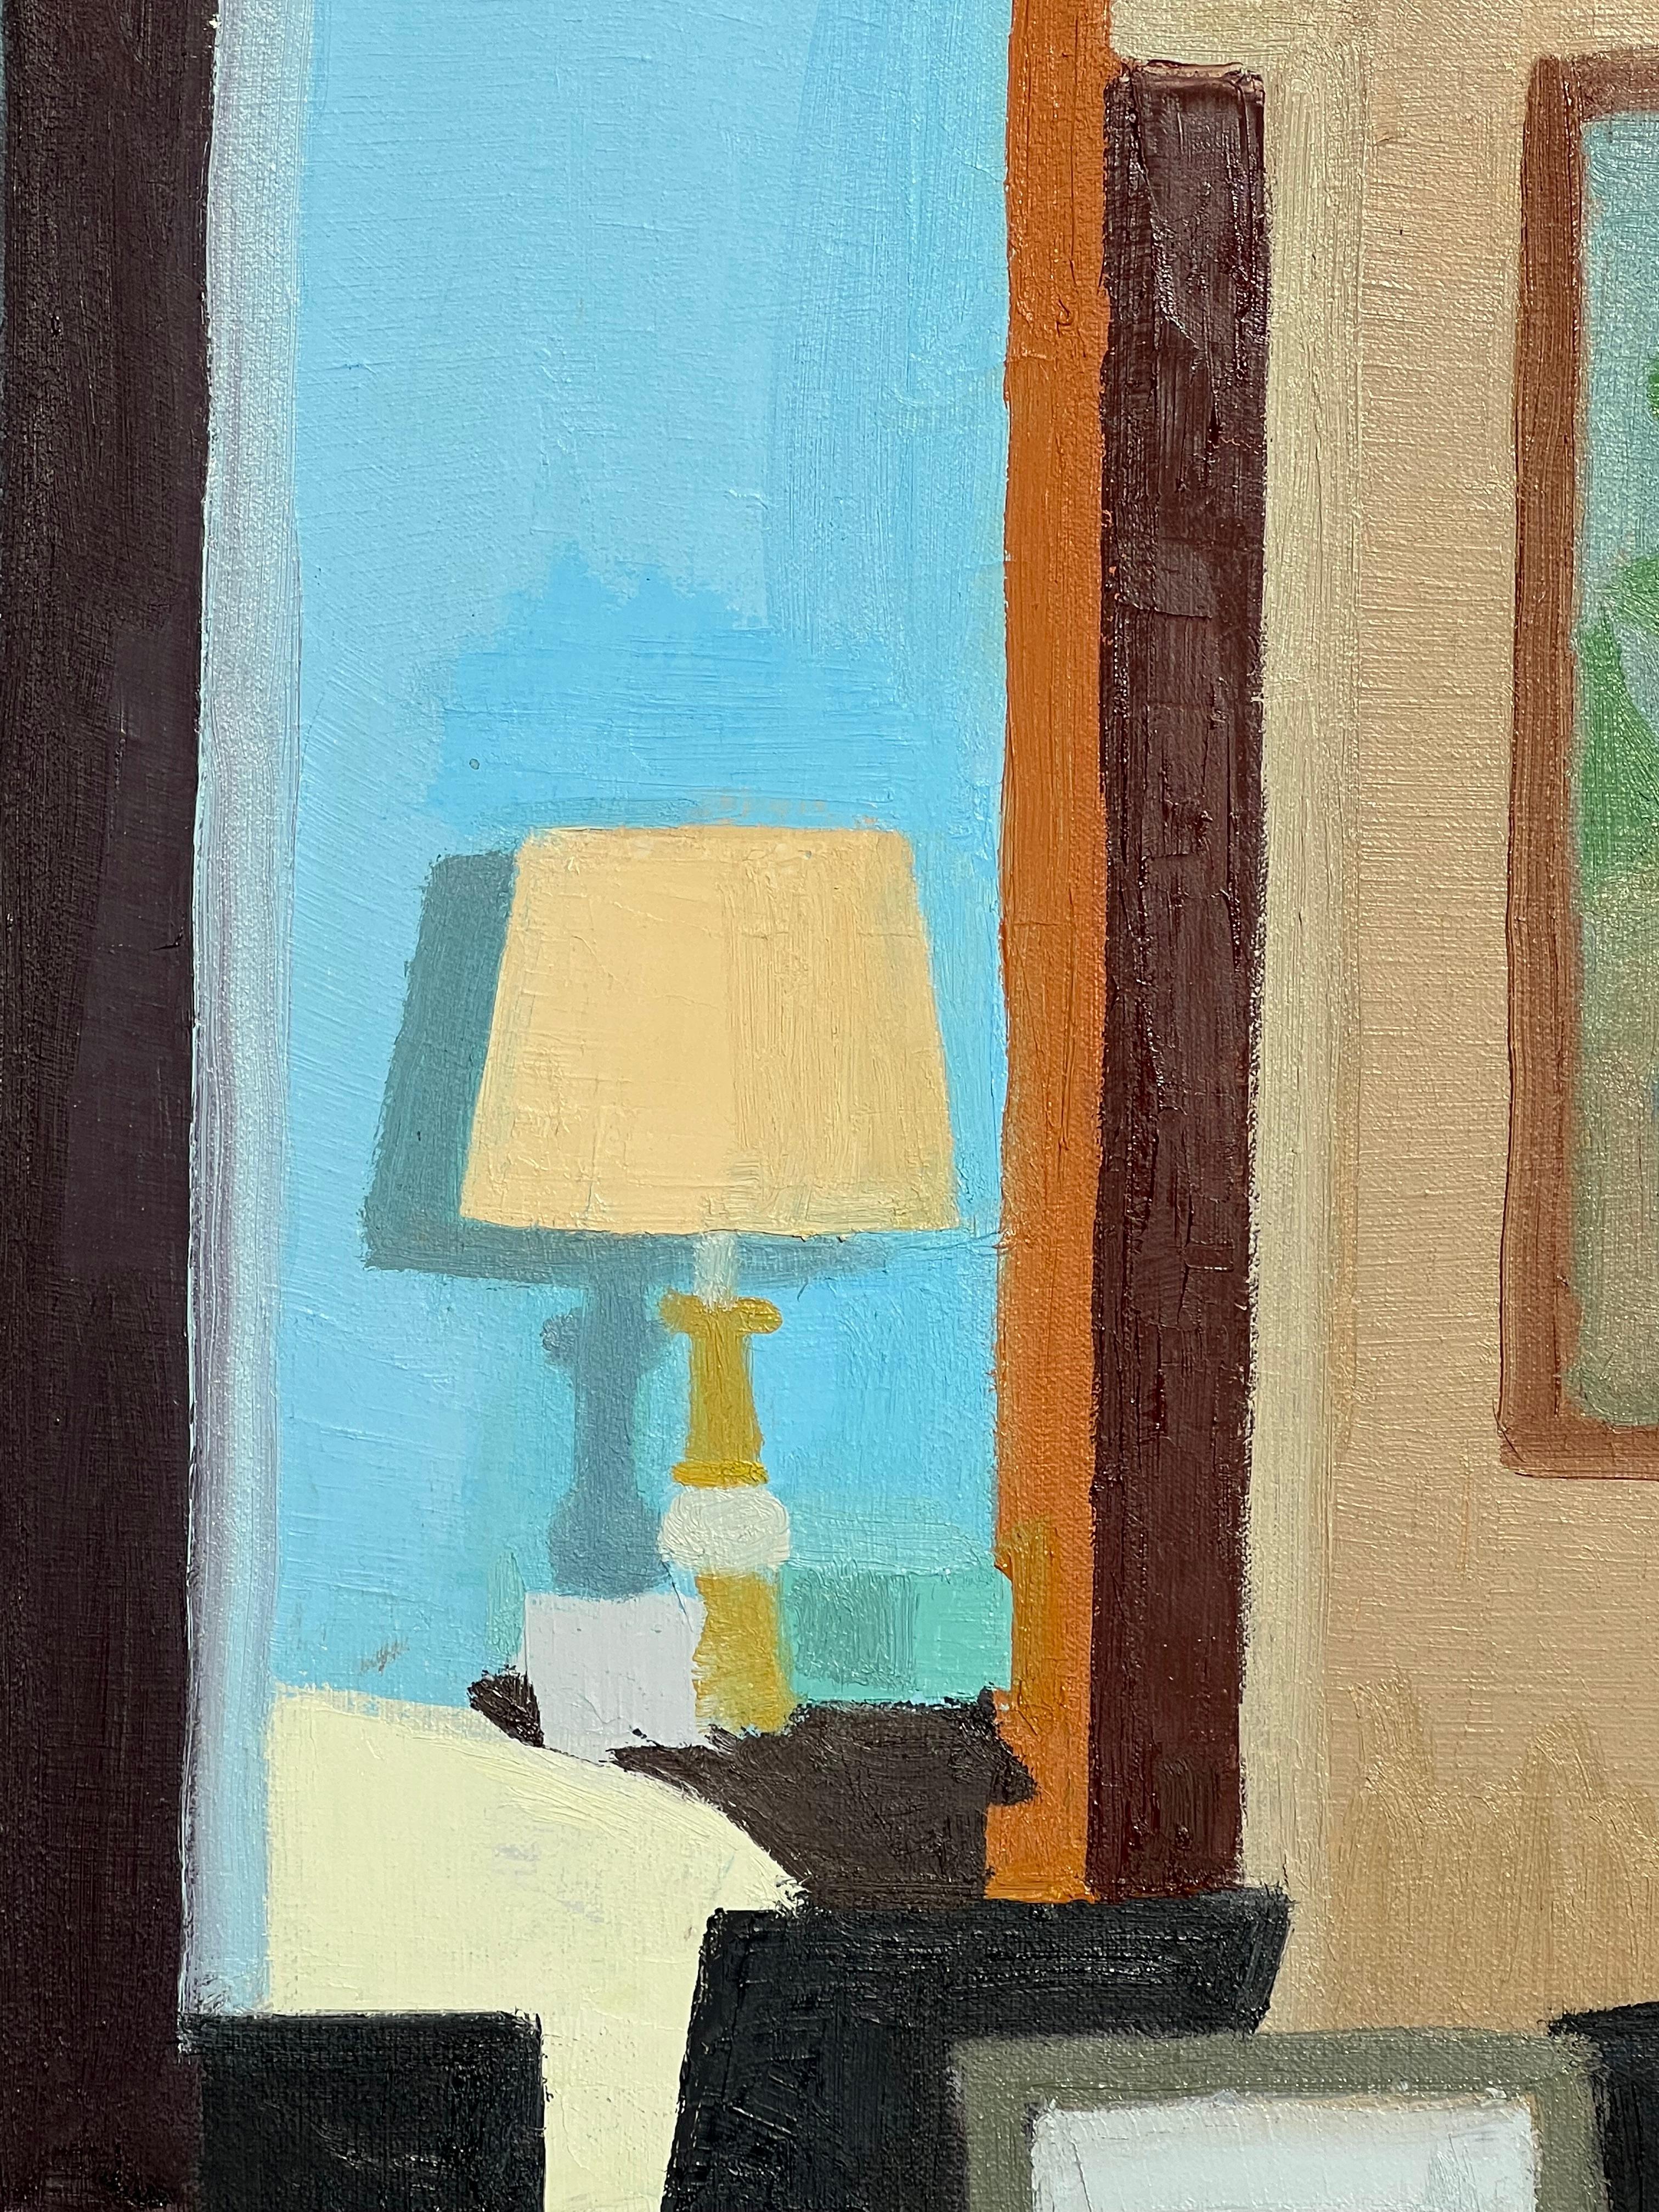 Hallway [Reflected] in the Dresser Mirror - Contemporary Painting by Benjamin Frederick